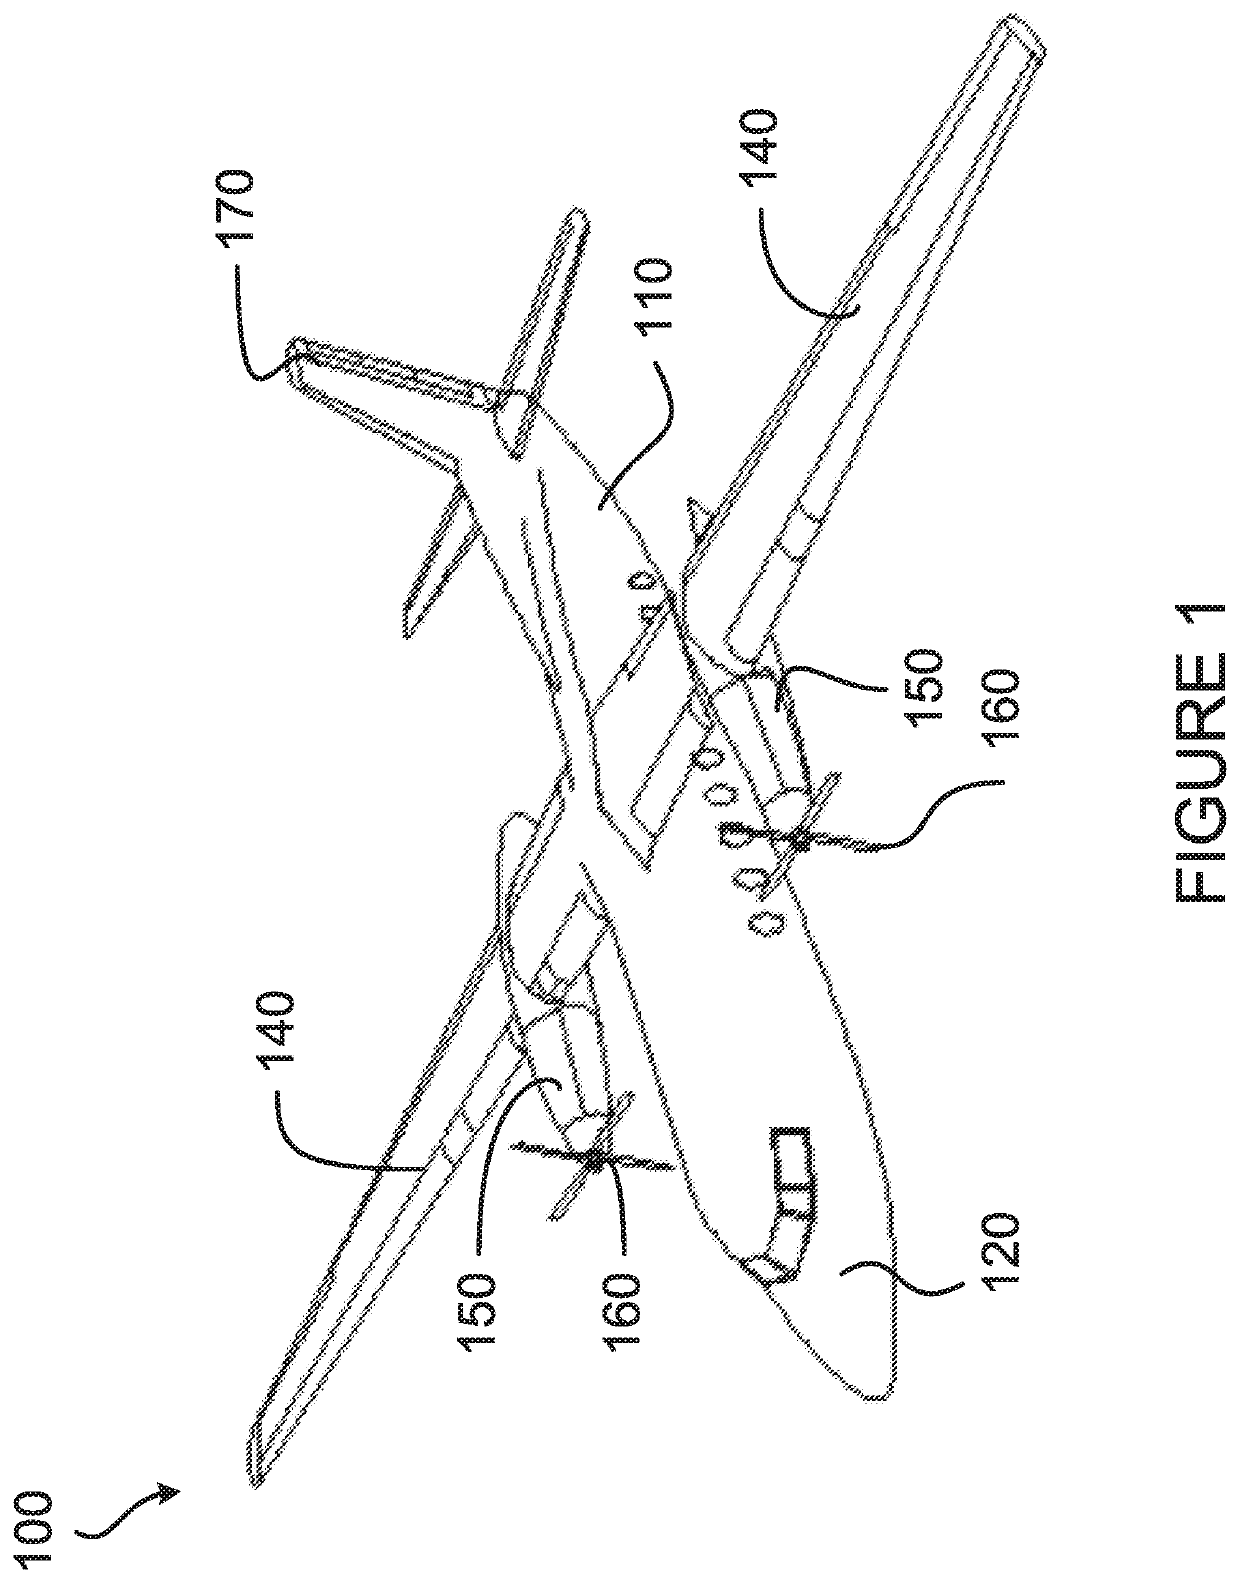 Autothrottle control system on turbopropeller-powered aircraft